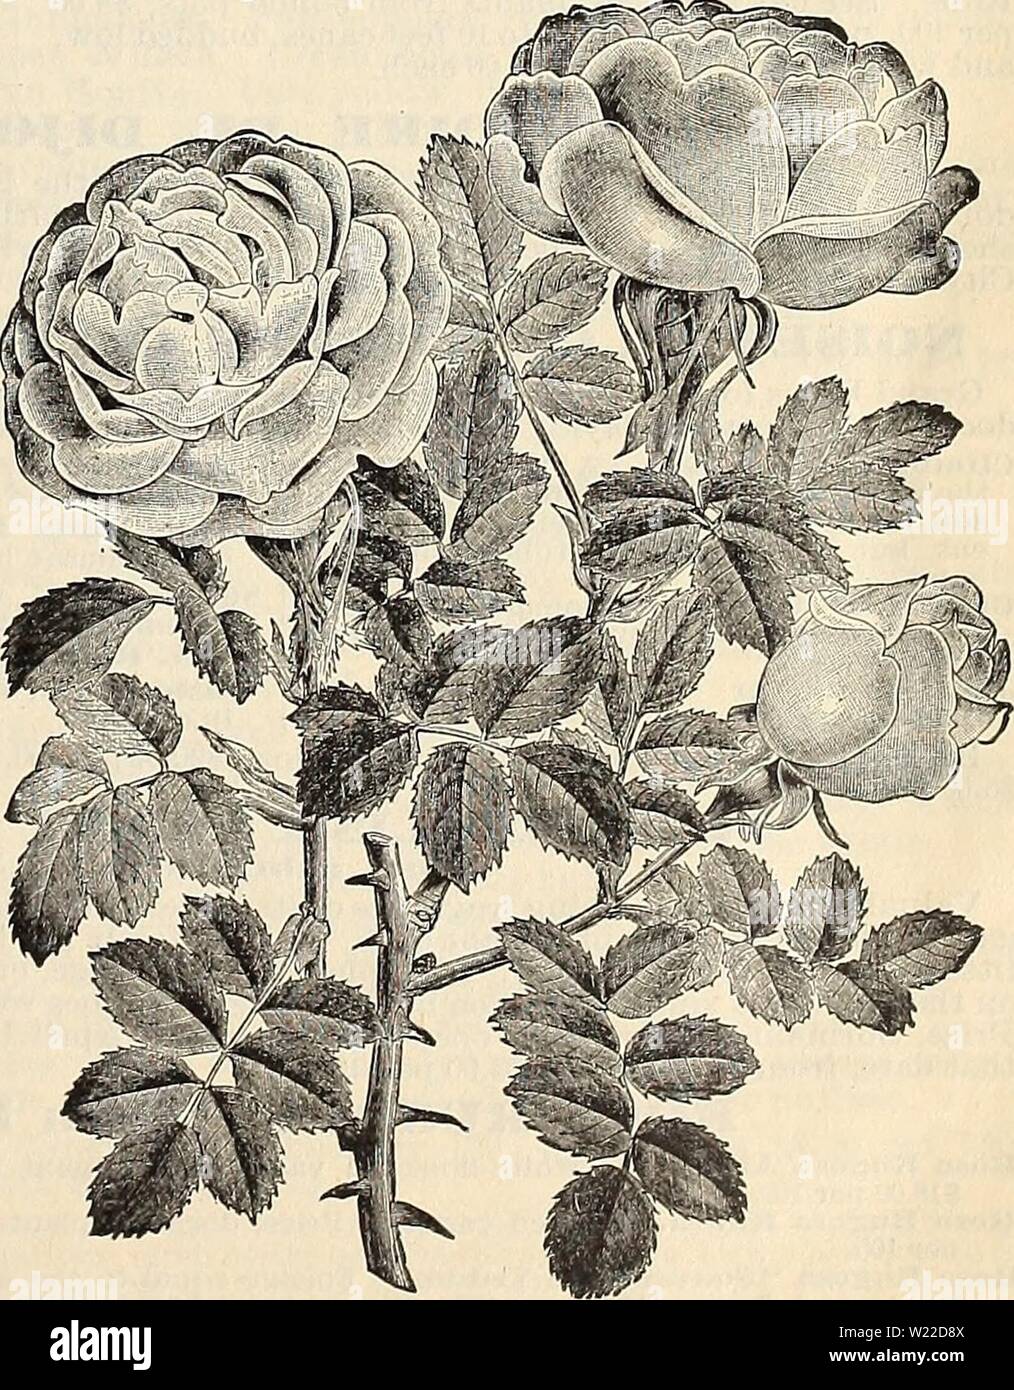 Archive image from page 10 of Dealers and florists wholesale list. Dealers and florists wholesale list of plants  dealersfloristsw18pete Year: 1896  HARDY DORMANT ROSES.—Continued. DORMANT ROSE, SHOWING HOW PLANTING AND PRUNING ARE DONE Prune when planted and as shown on dotted lines. Eugene Furst. Velvety crimson, very large flower, with broad massive petals quite double; a distinct and valuable Rose. First among crimsons. Fisher Holmes. Finely shaped flowers and buds, intense, dark 'velvety crim- son ; considered by connoisseurs to be an improvement on Gen. Jacqueminot. Francois Levet. A bea Stock Photo